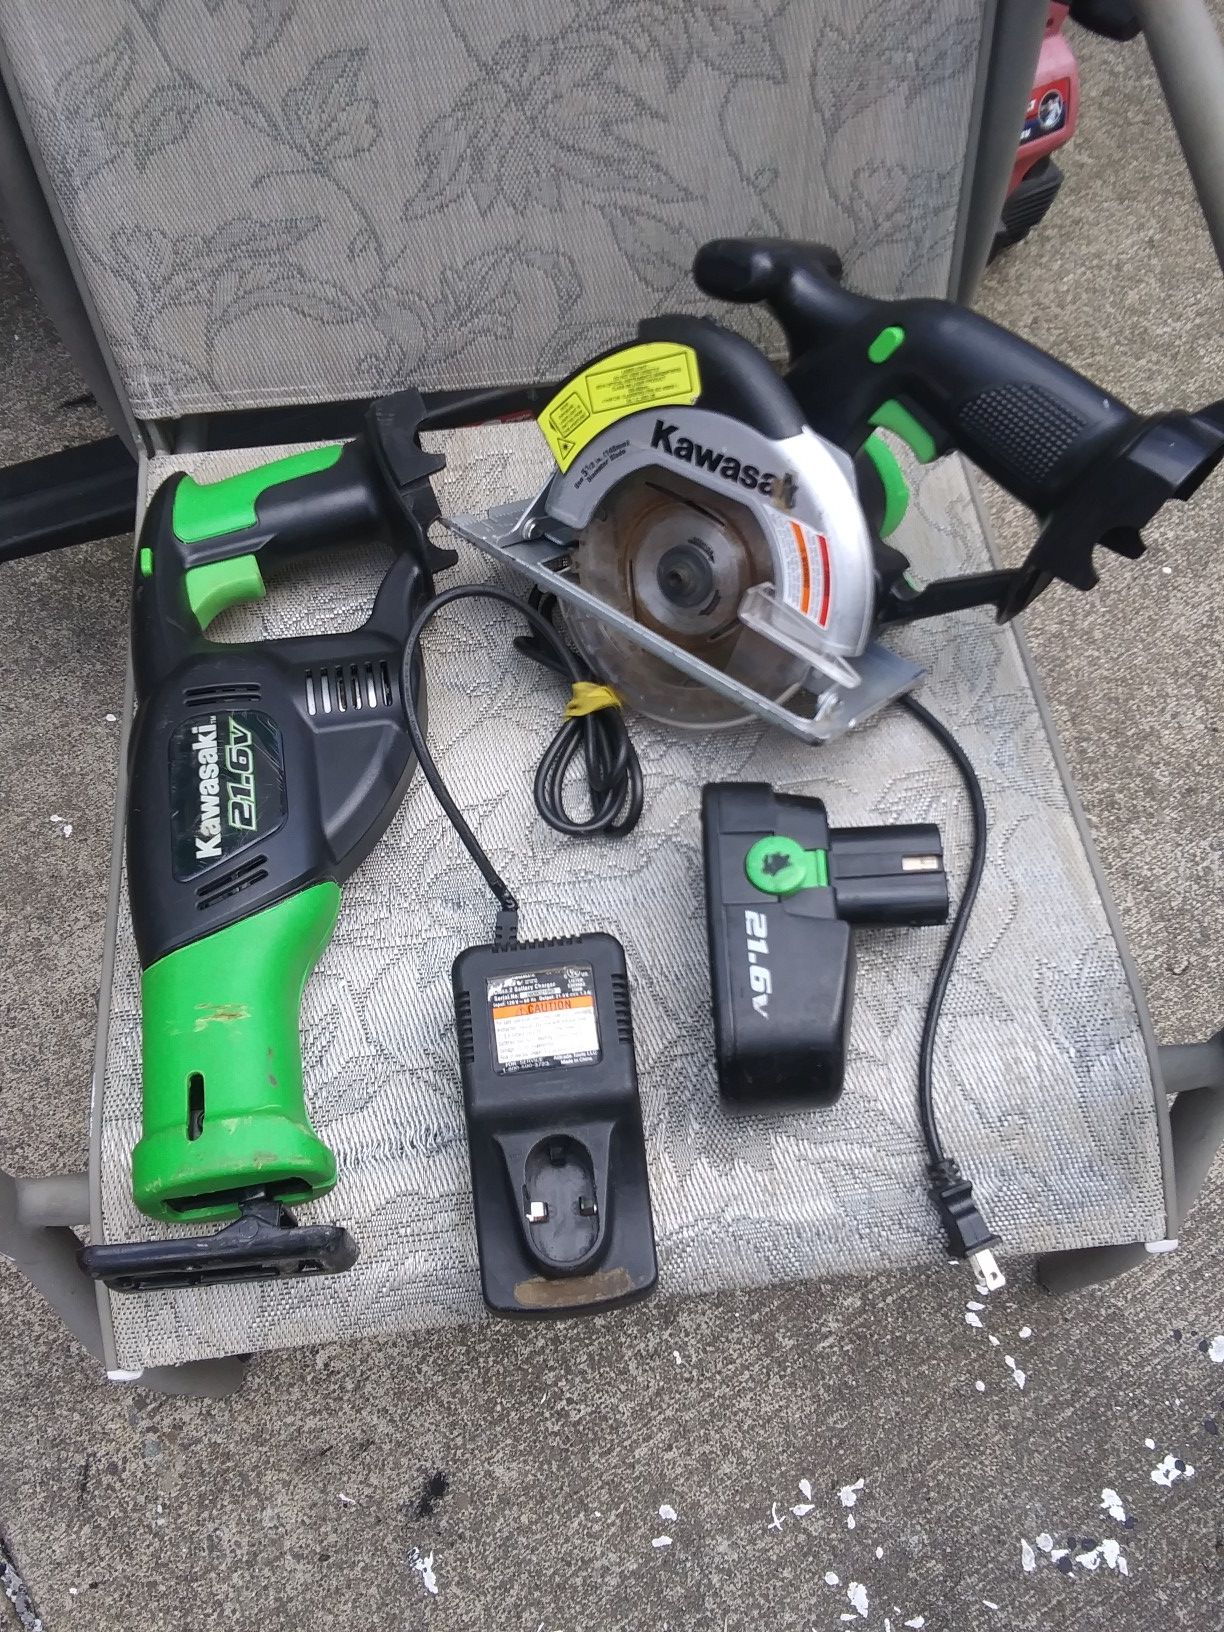 Cordless drill and Saws All